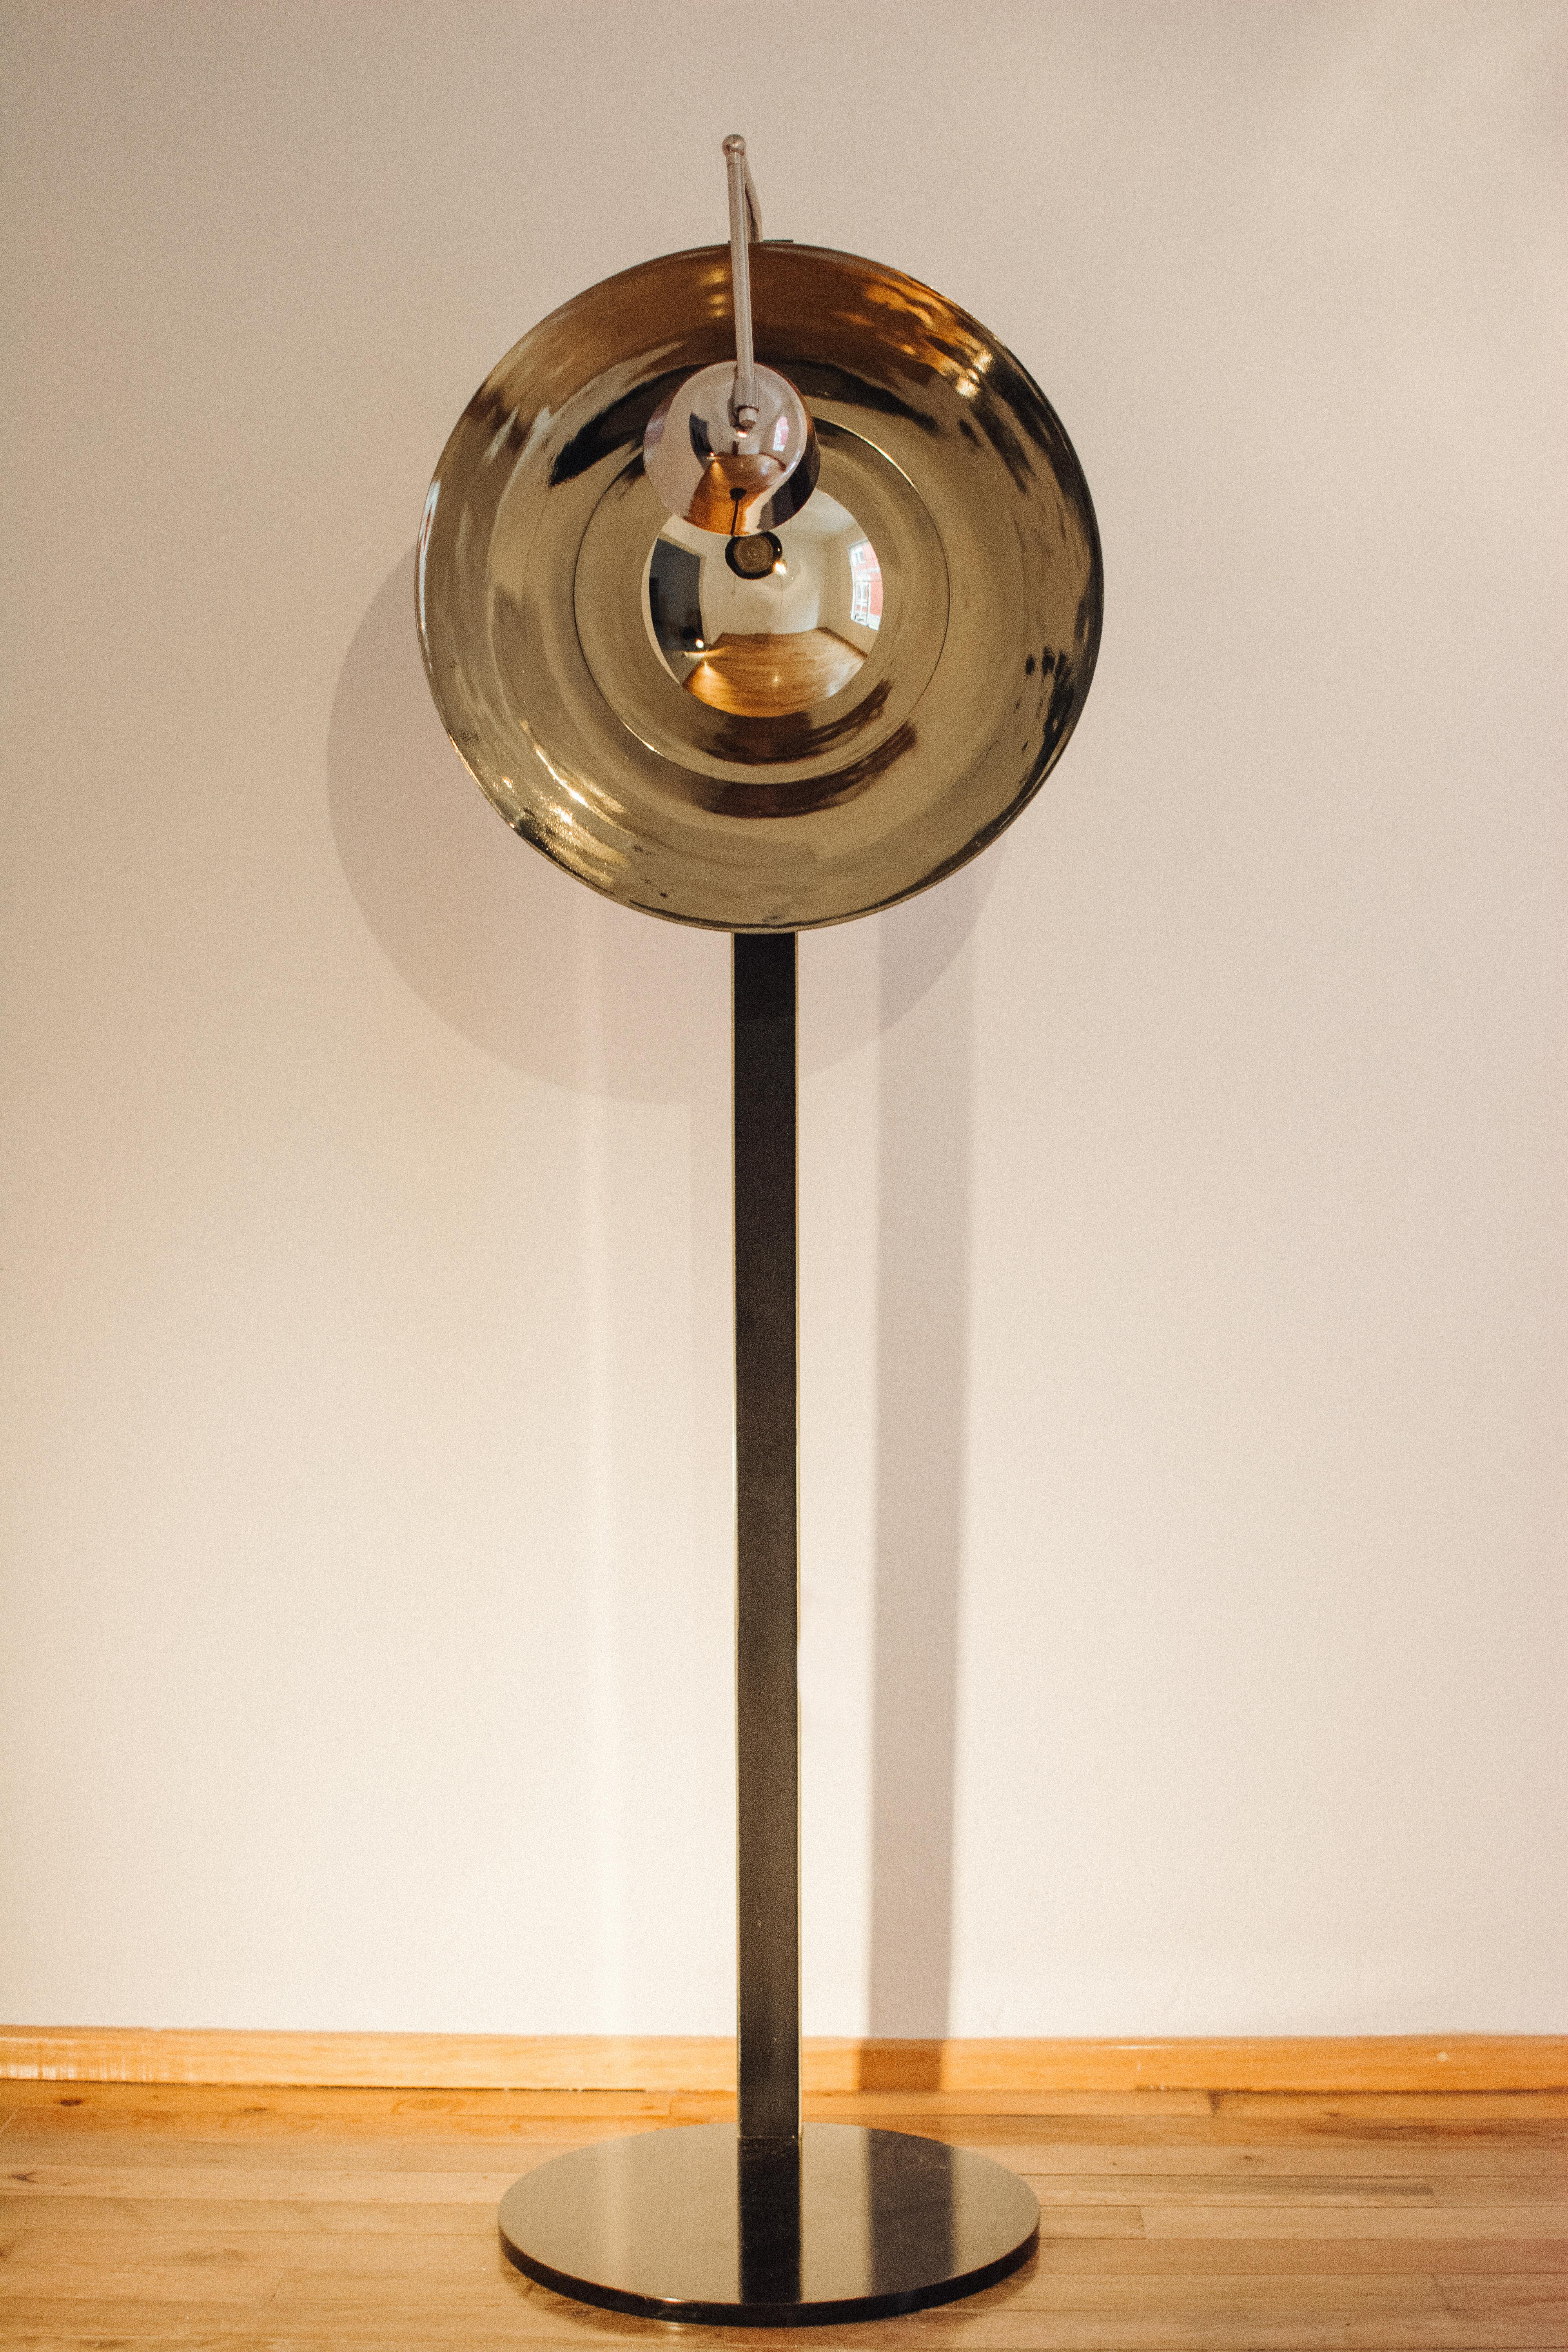 Yacaman floor lamp by Sombra Design
Limited Edition of 25
Dimensions: D 48 x W 60 x H 193 cm
Materials: Brass, nickel plated steel.

All our lamps can be wired according to each country. If sold to the USA it will be wired for the USA for